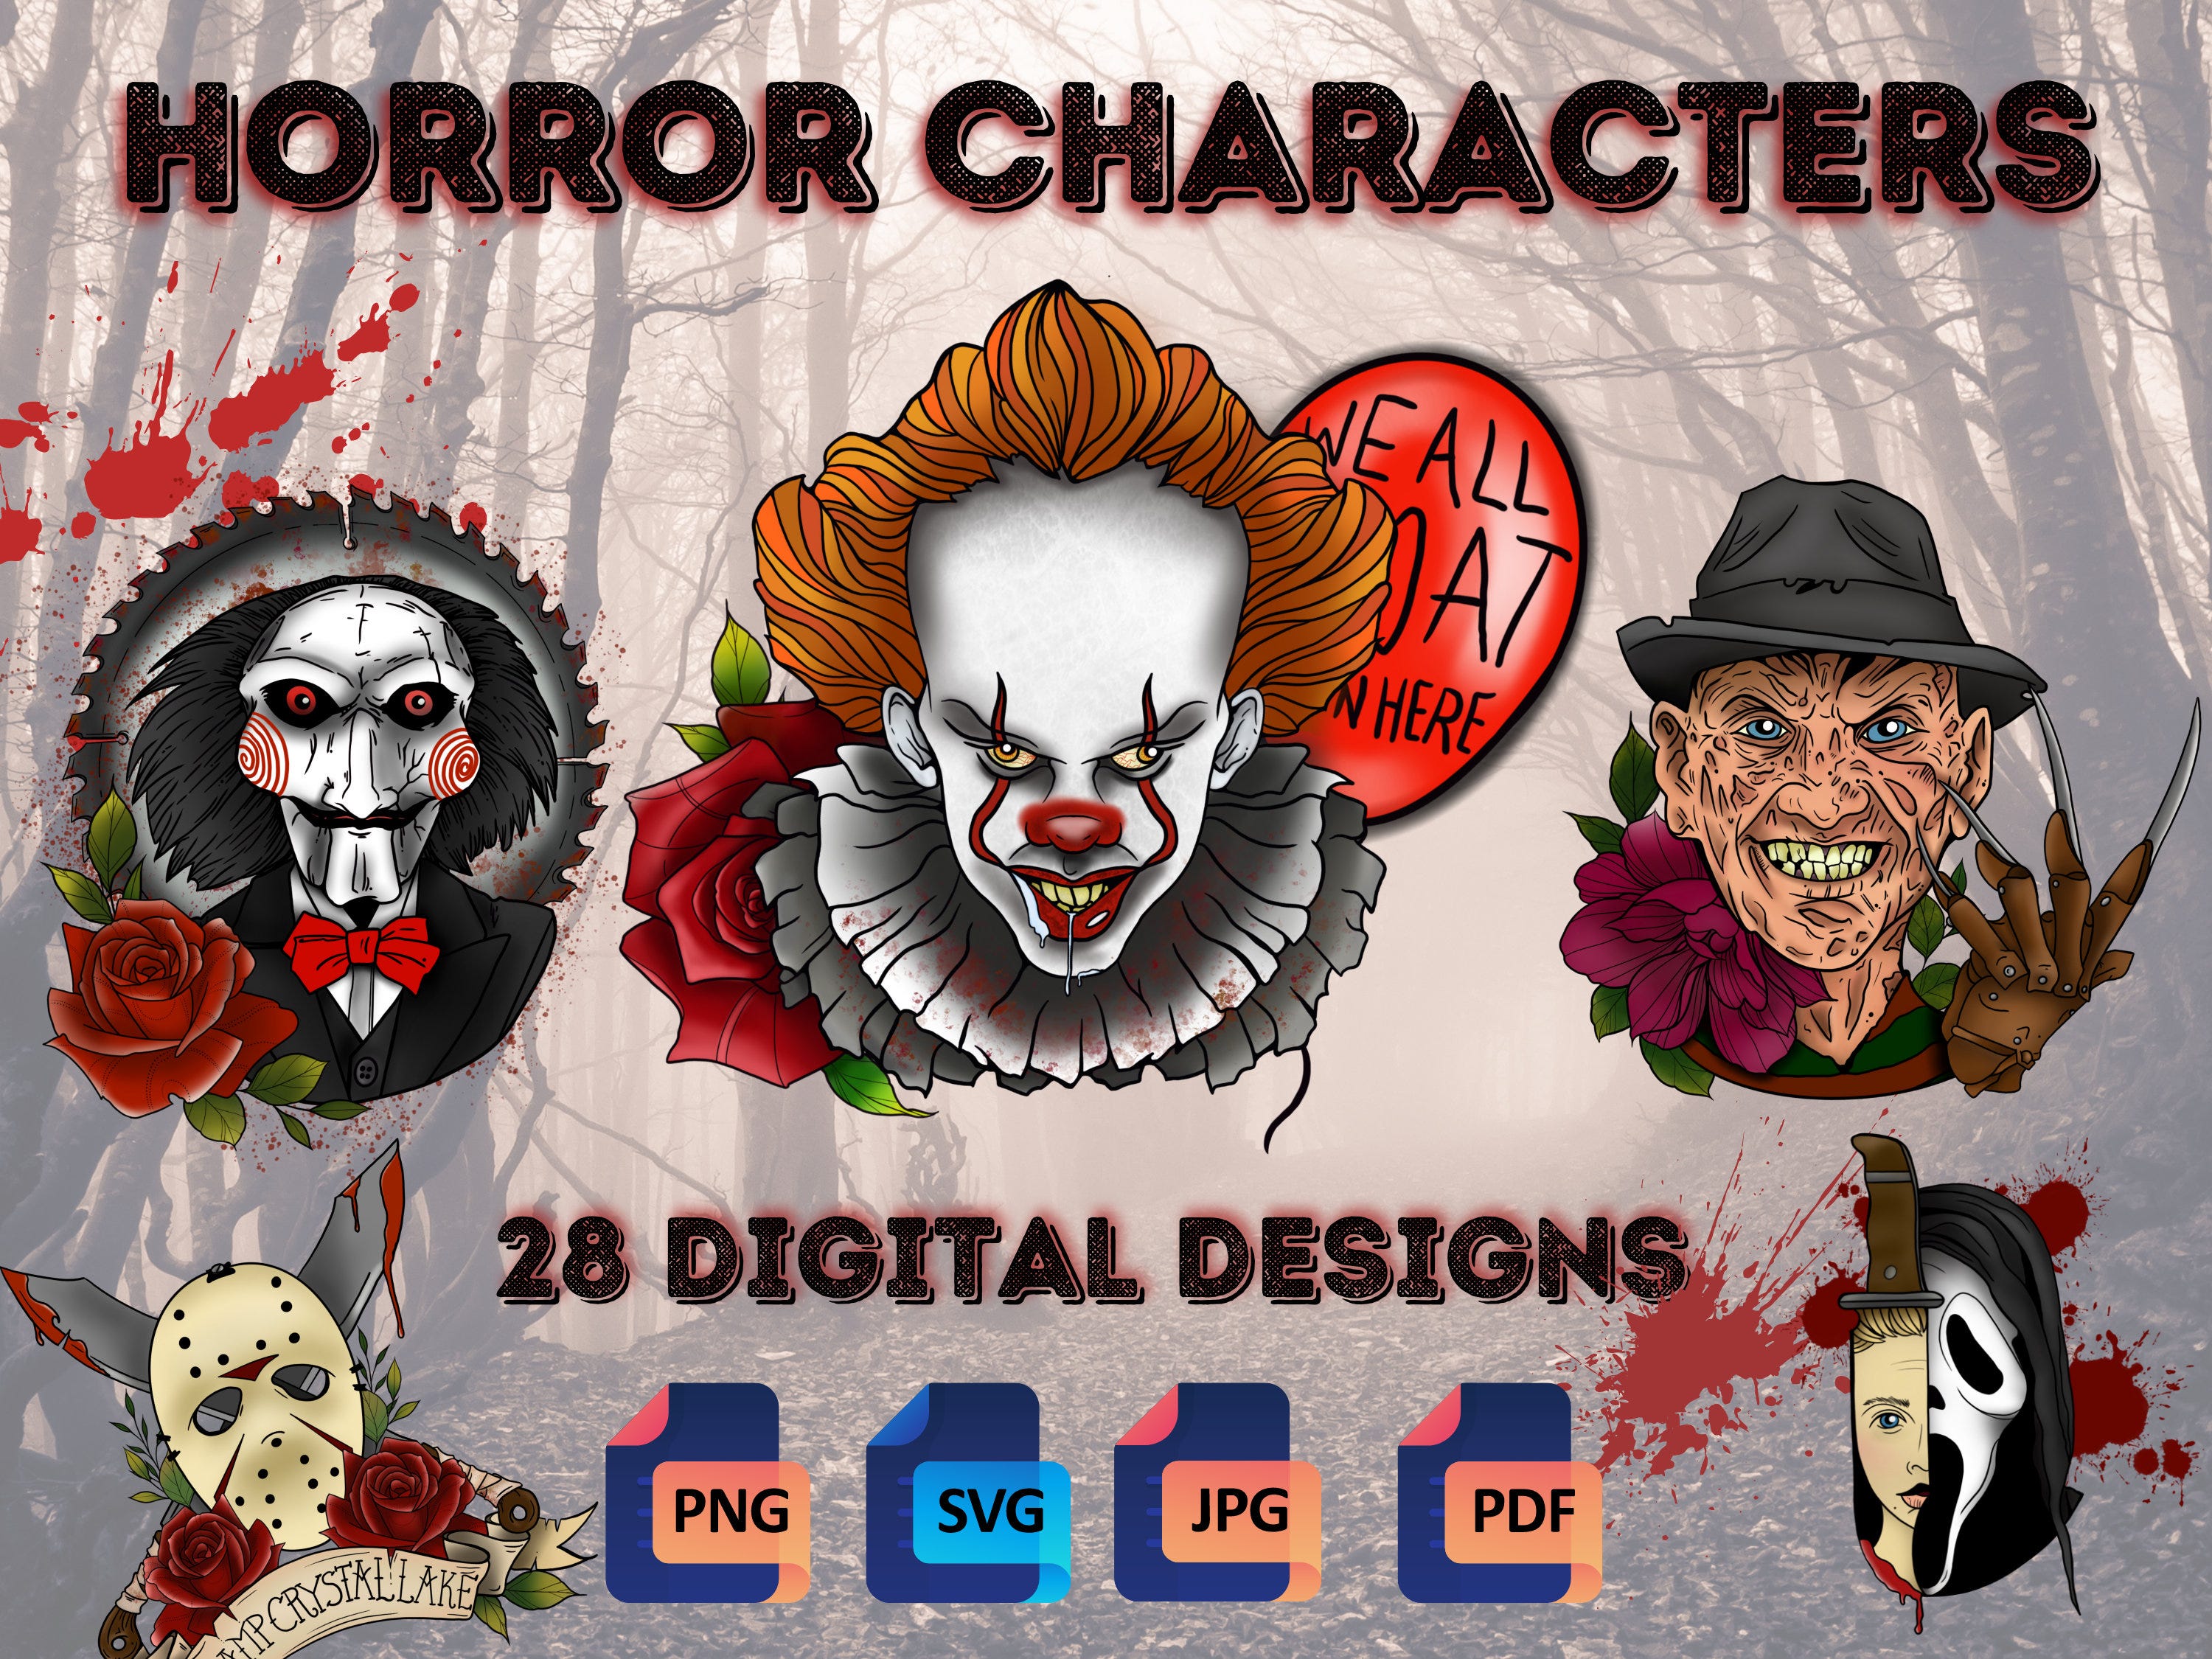 Horror Movie - Villains - Halloween Tattoo Flash | PNG/SVG Digital Design Files for Tattoos, T-Shirts, Die Cut, Sublimation, & More!